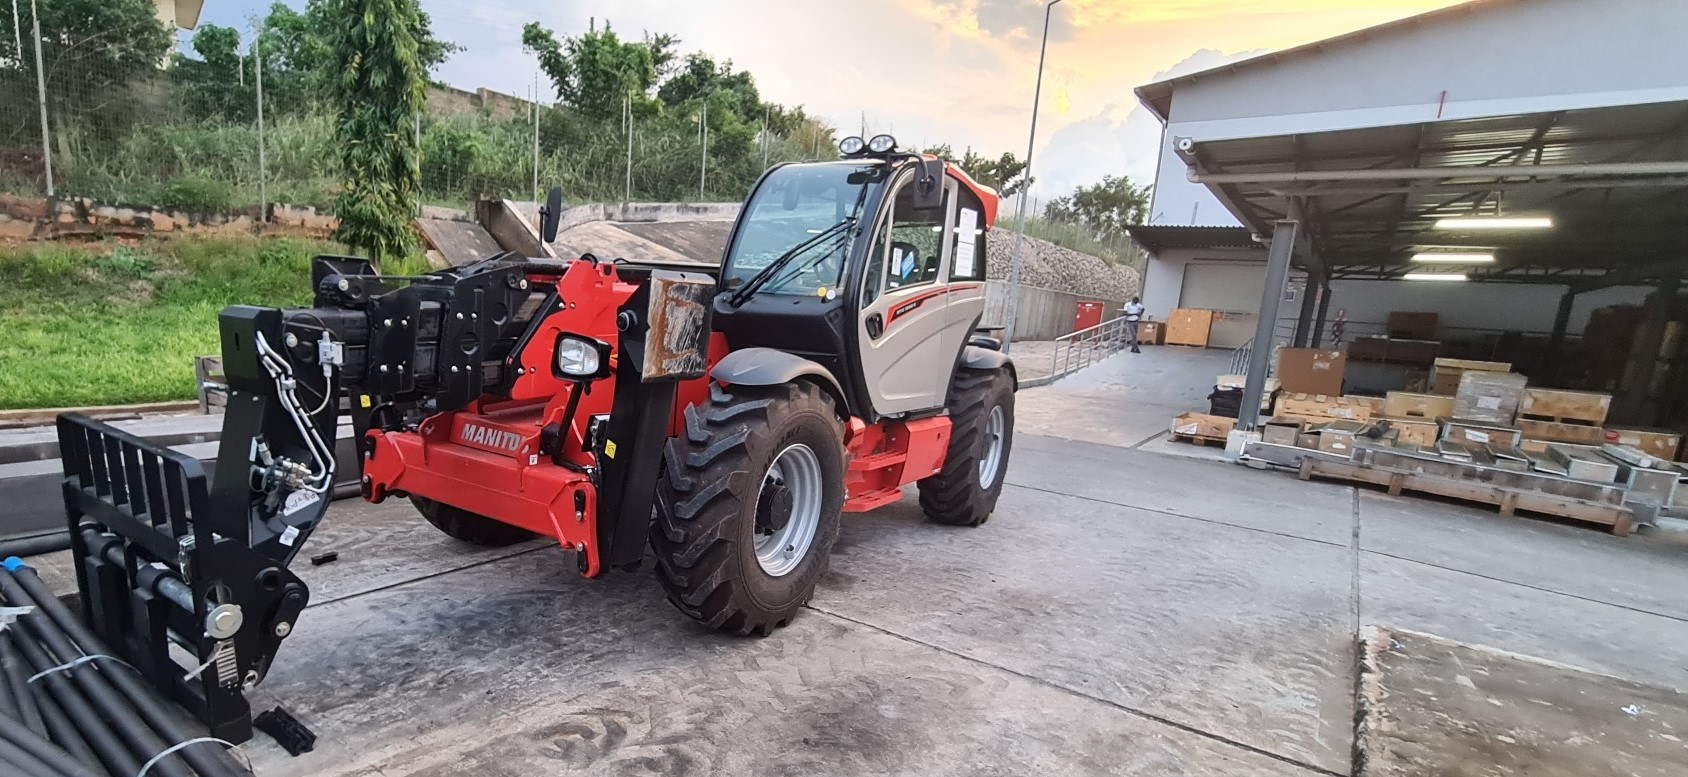 MANITOU TELEHANDLER JOINS FLEET OF MACHINERY AT SANDVIK: WORKING WELL FOR STATE-OF-ART WEST AFRICA WORKSHOP!